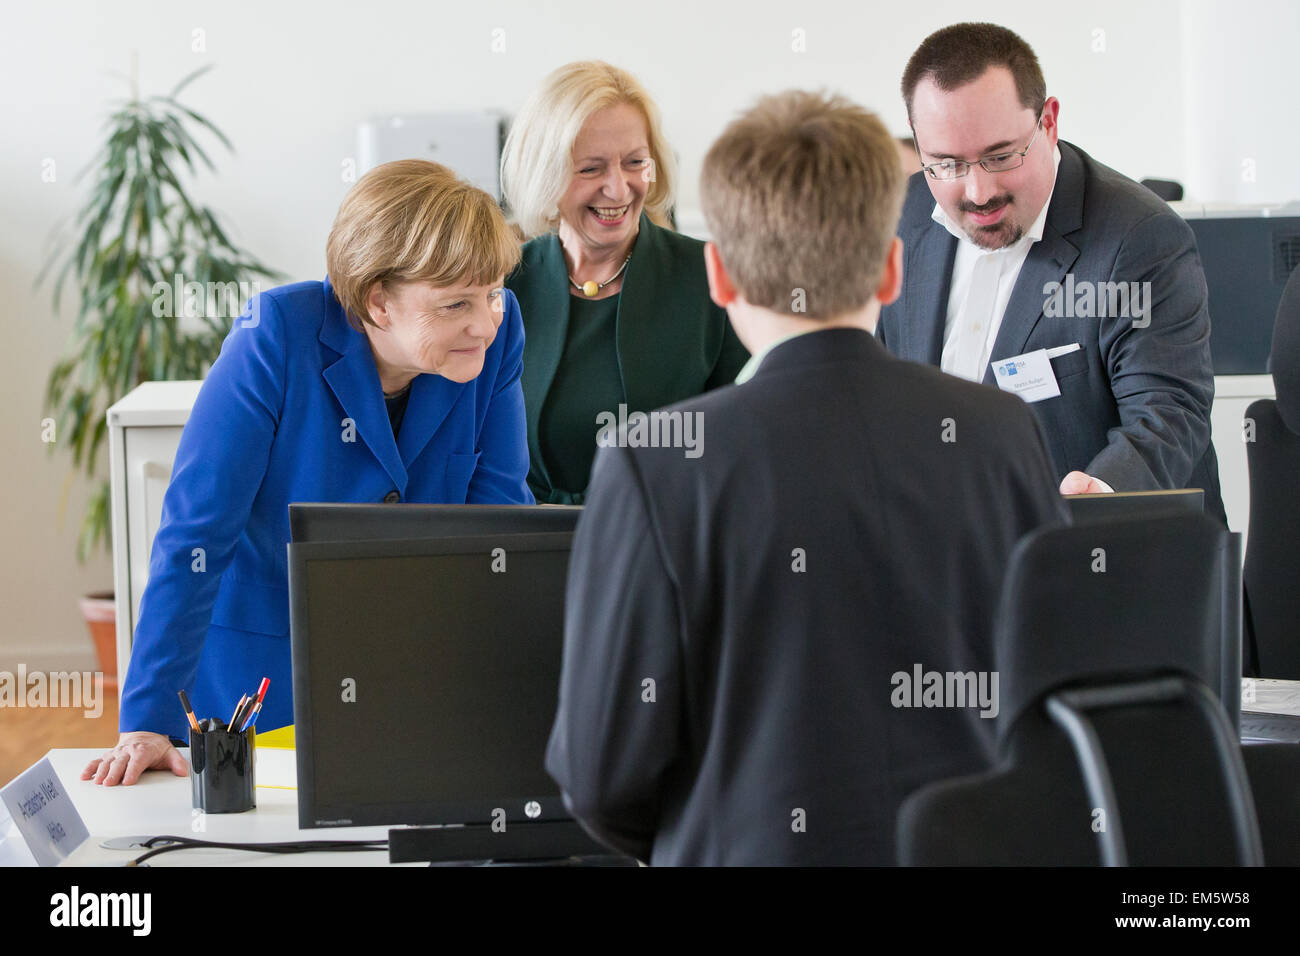 Nuremberg, Germany. 16th Apr, 2015. German Chancellor Angela Merkel (L) and the German Minister for Education and Research Johanna Wanka (both CDU), in conversation with employees during a visit to the IHK FOSA, (Foreign Skills Approval), the national competence centre of the German chambers of industry and commerce for the evaluation and recognition of foreign vocational qualifications, in Nuremberg, Germany, 16 April 2015. PHOTO: DANIEL KARMANN/dpa/Alamy Live News Stock Photo